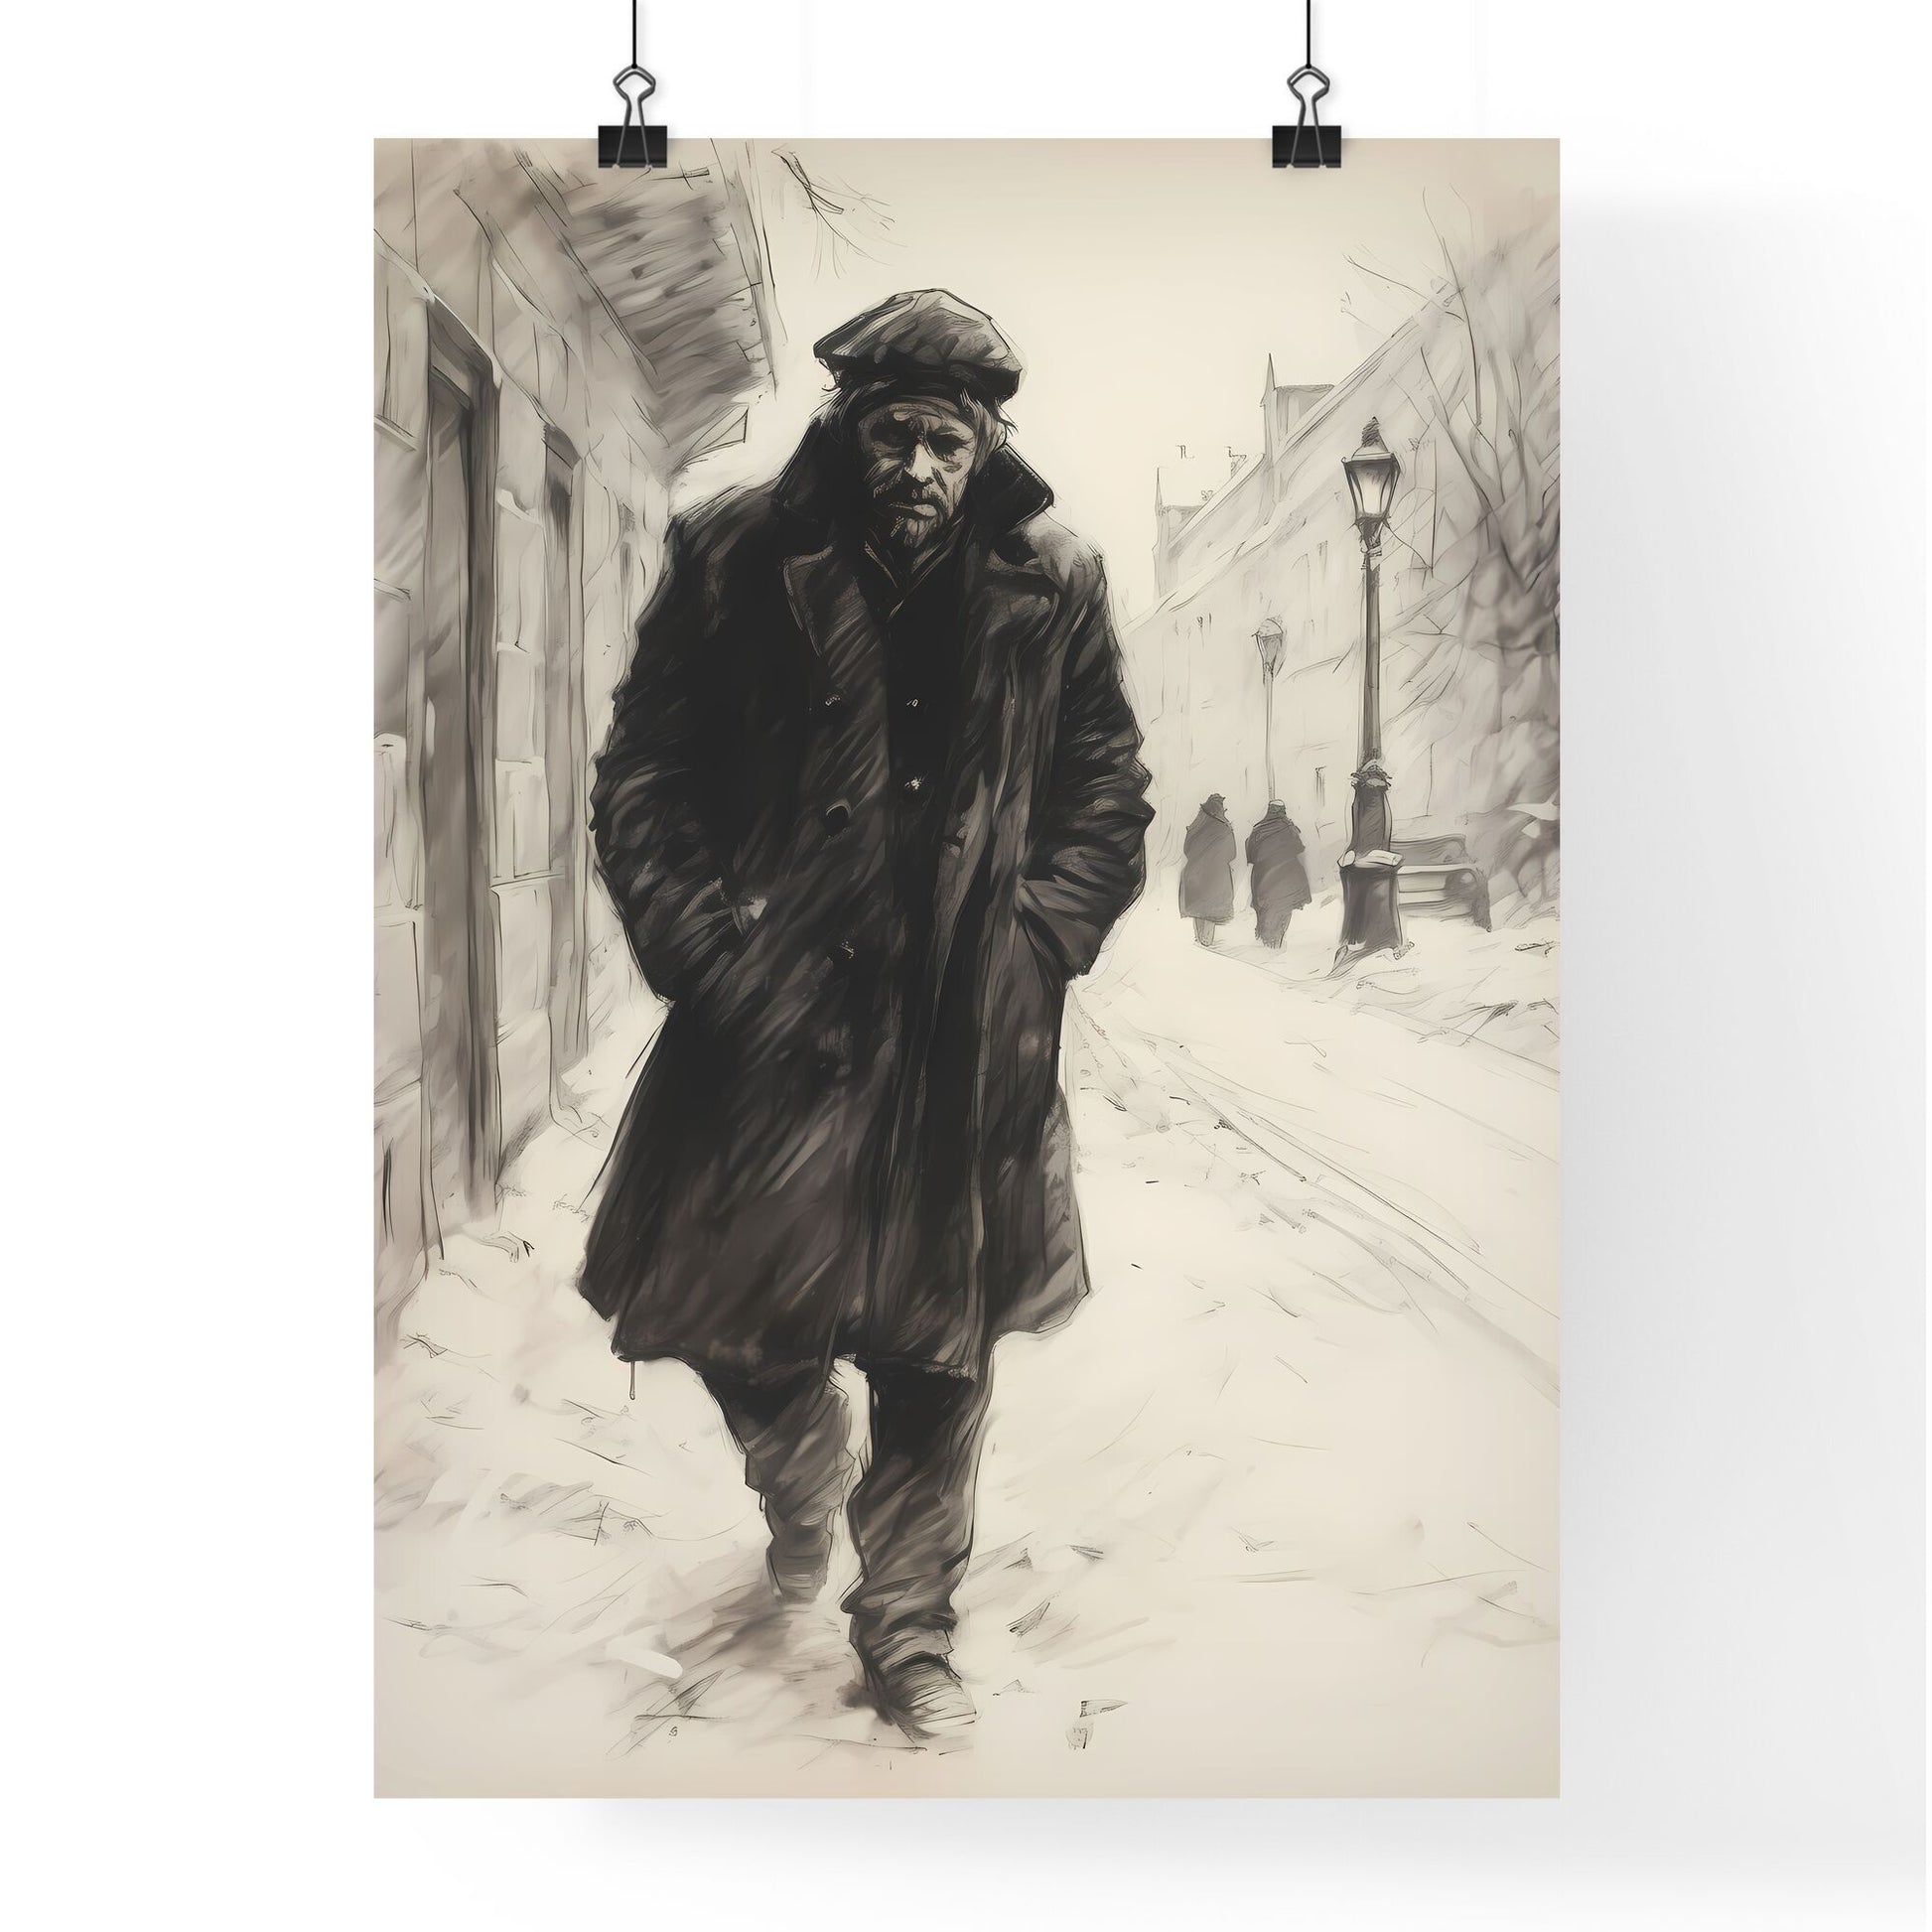 A Poster of charcoal drawing of a boshevik - A Man Walking Down A Snowy Street Default Title